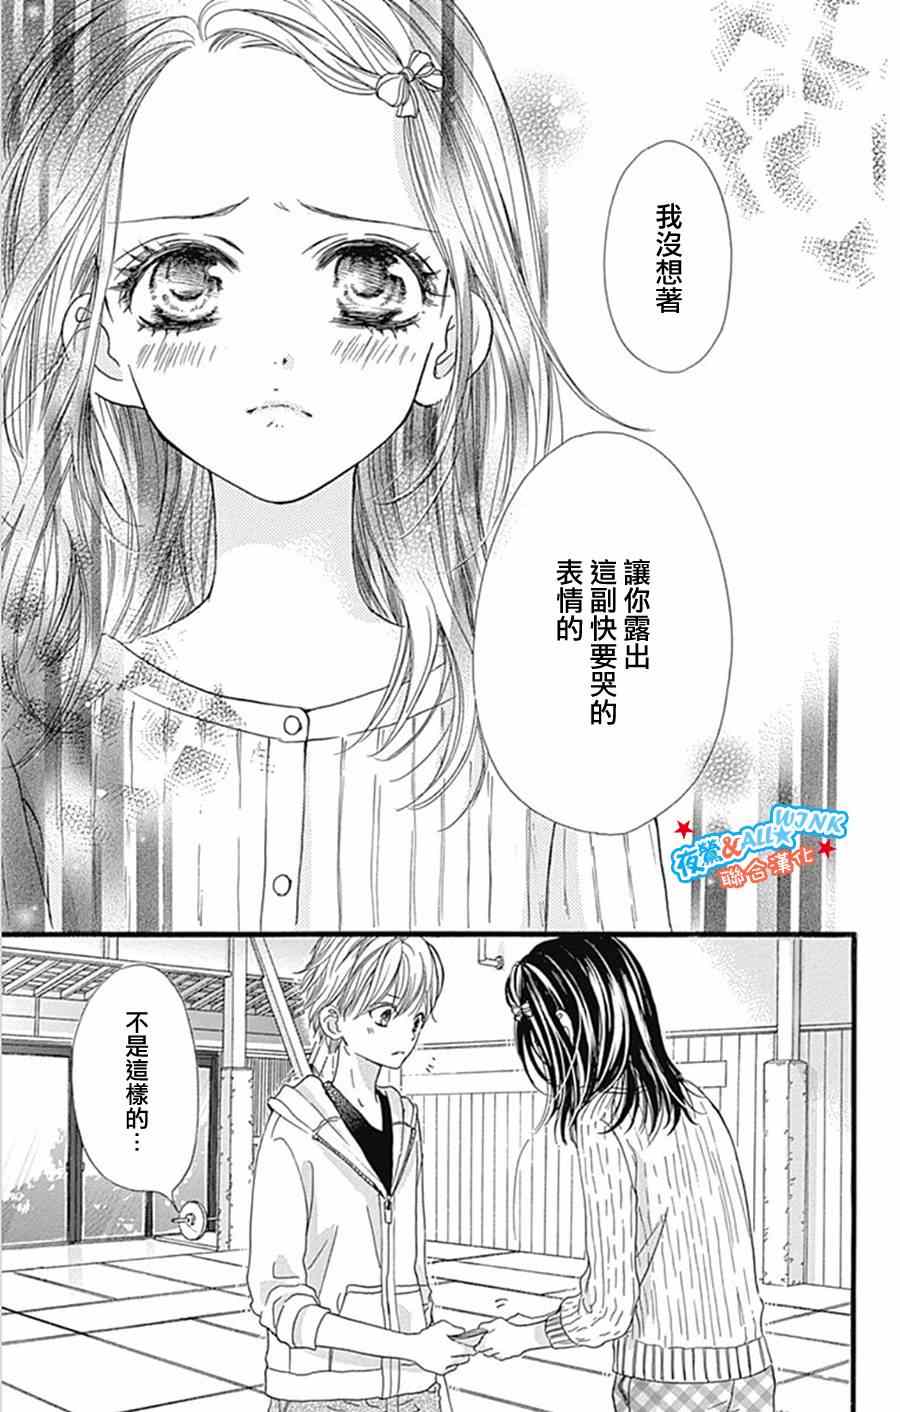 I love you baby - 第8話 - 4